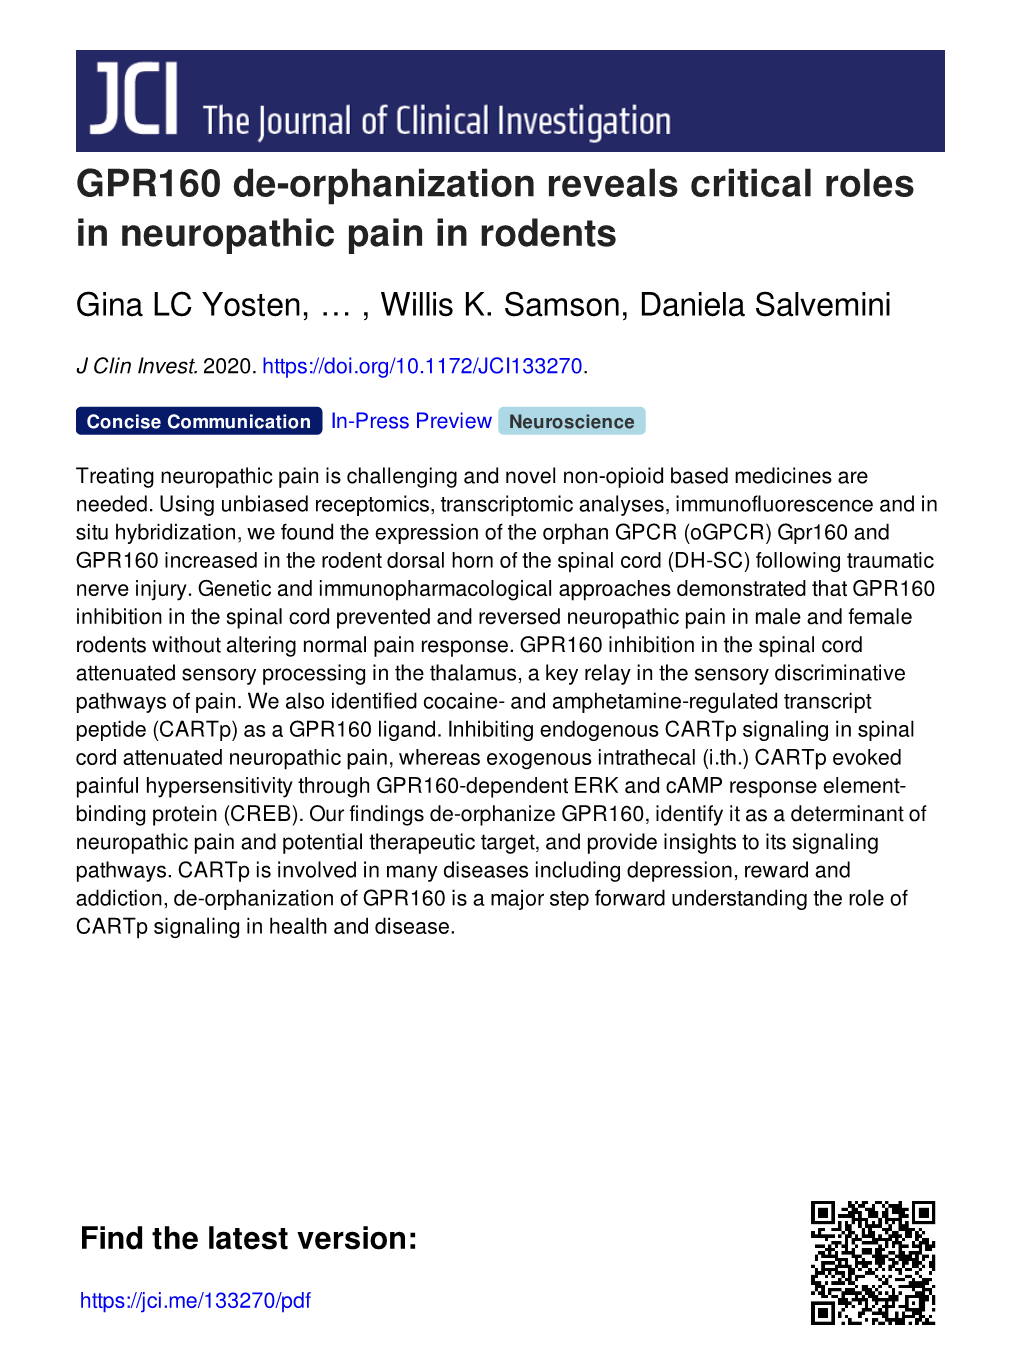 GPR160 De-Orphanization Reveals Critical Roles in Neuropathic Pain in Rodents